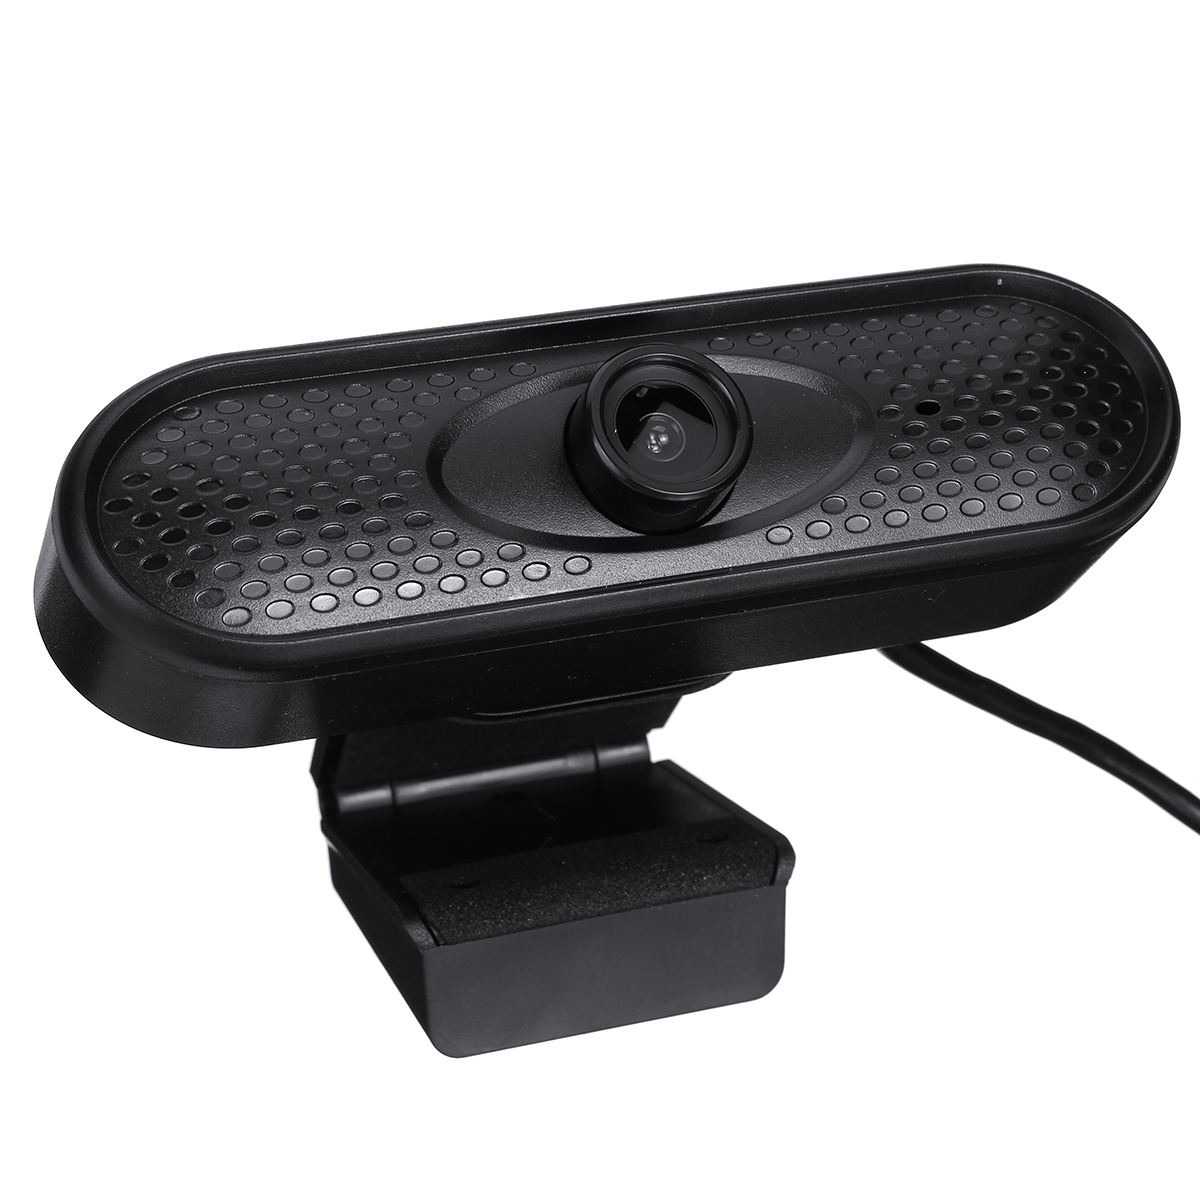 1080P-HD-USB-Webcam-Conference-Live-Manual-Focus-Computer-Camera-Built-in-Omni-directional-Micphone--1674541-3